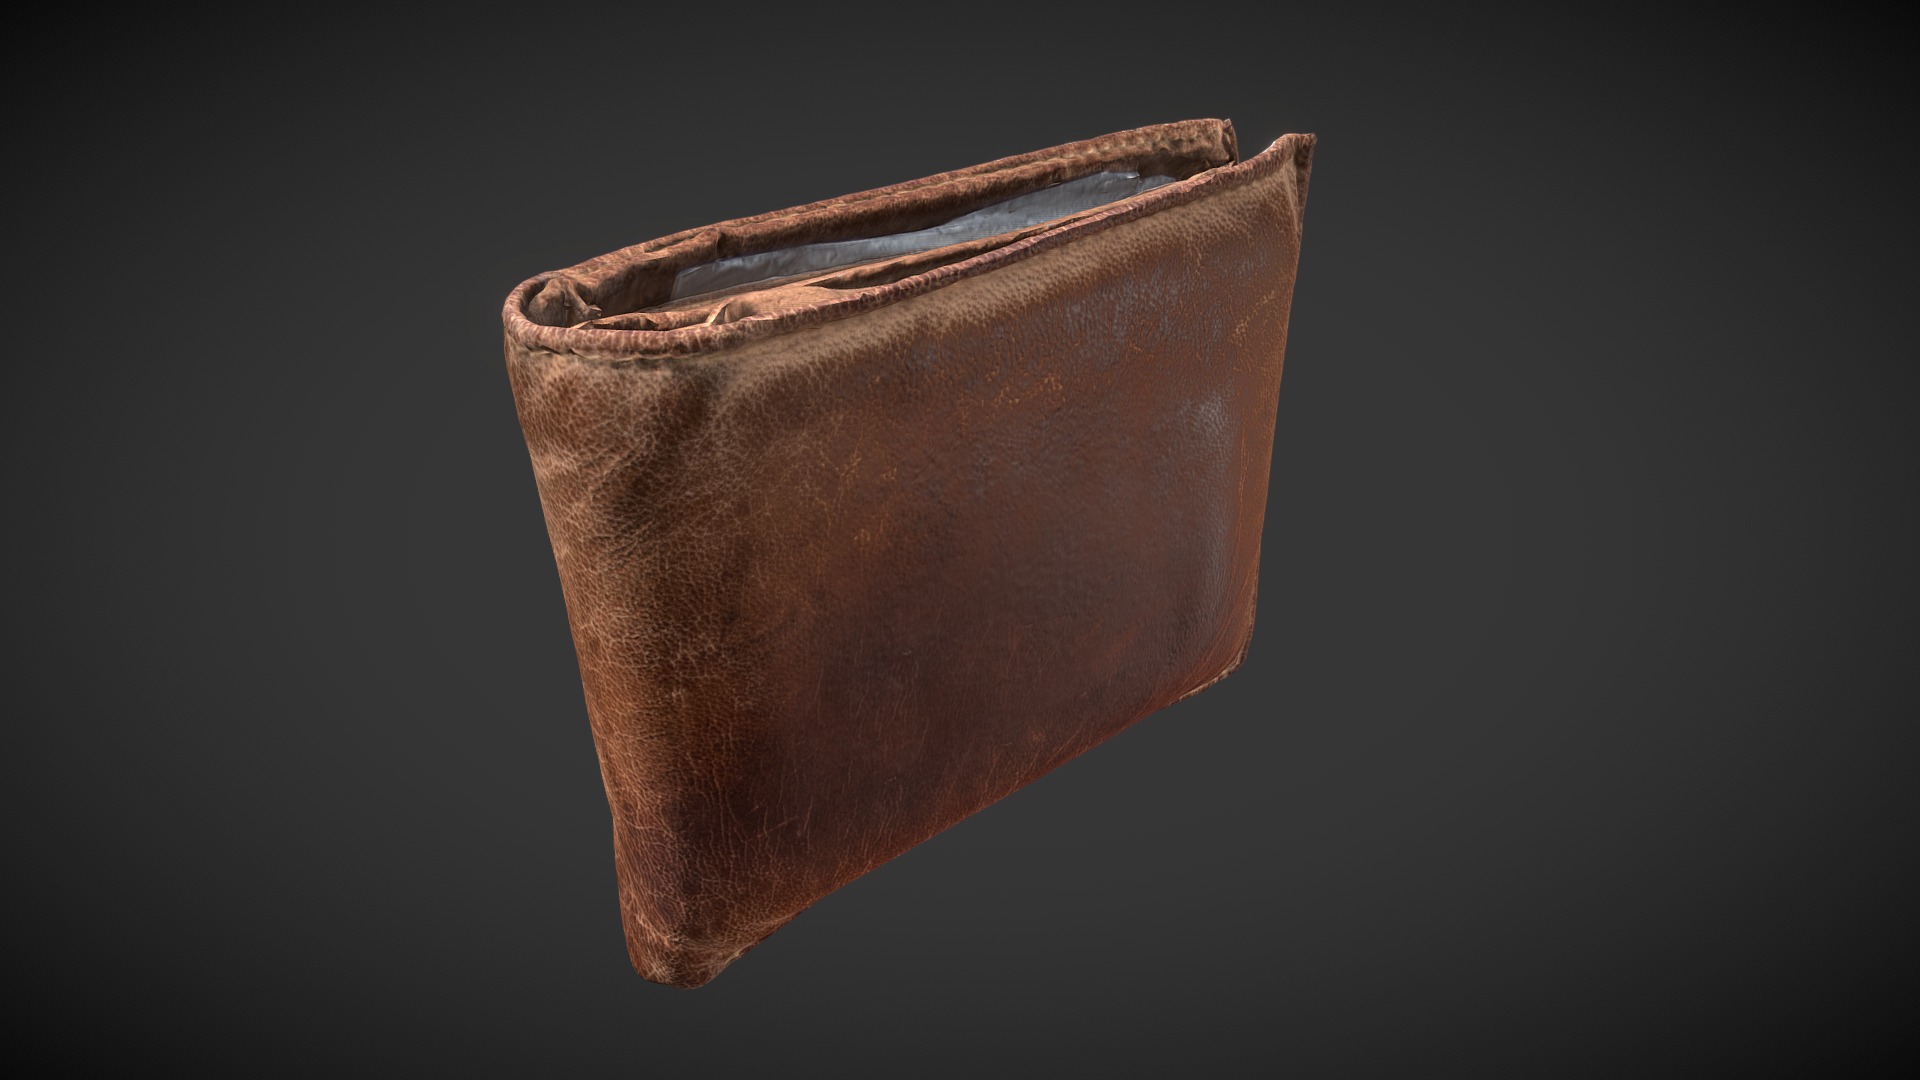 3D model Old Leather Wallet 3D Scan - This is a 3D model of the Old Leather Wallet 3D Scan. The 3D model is about a brown leather wallet.